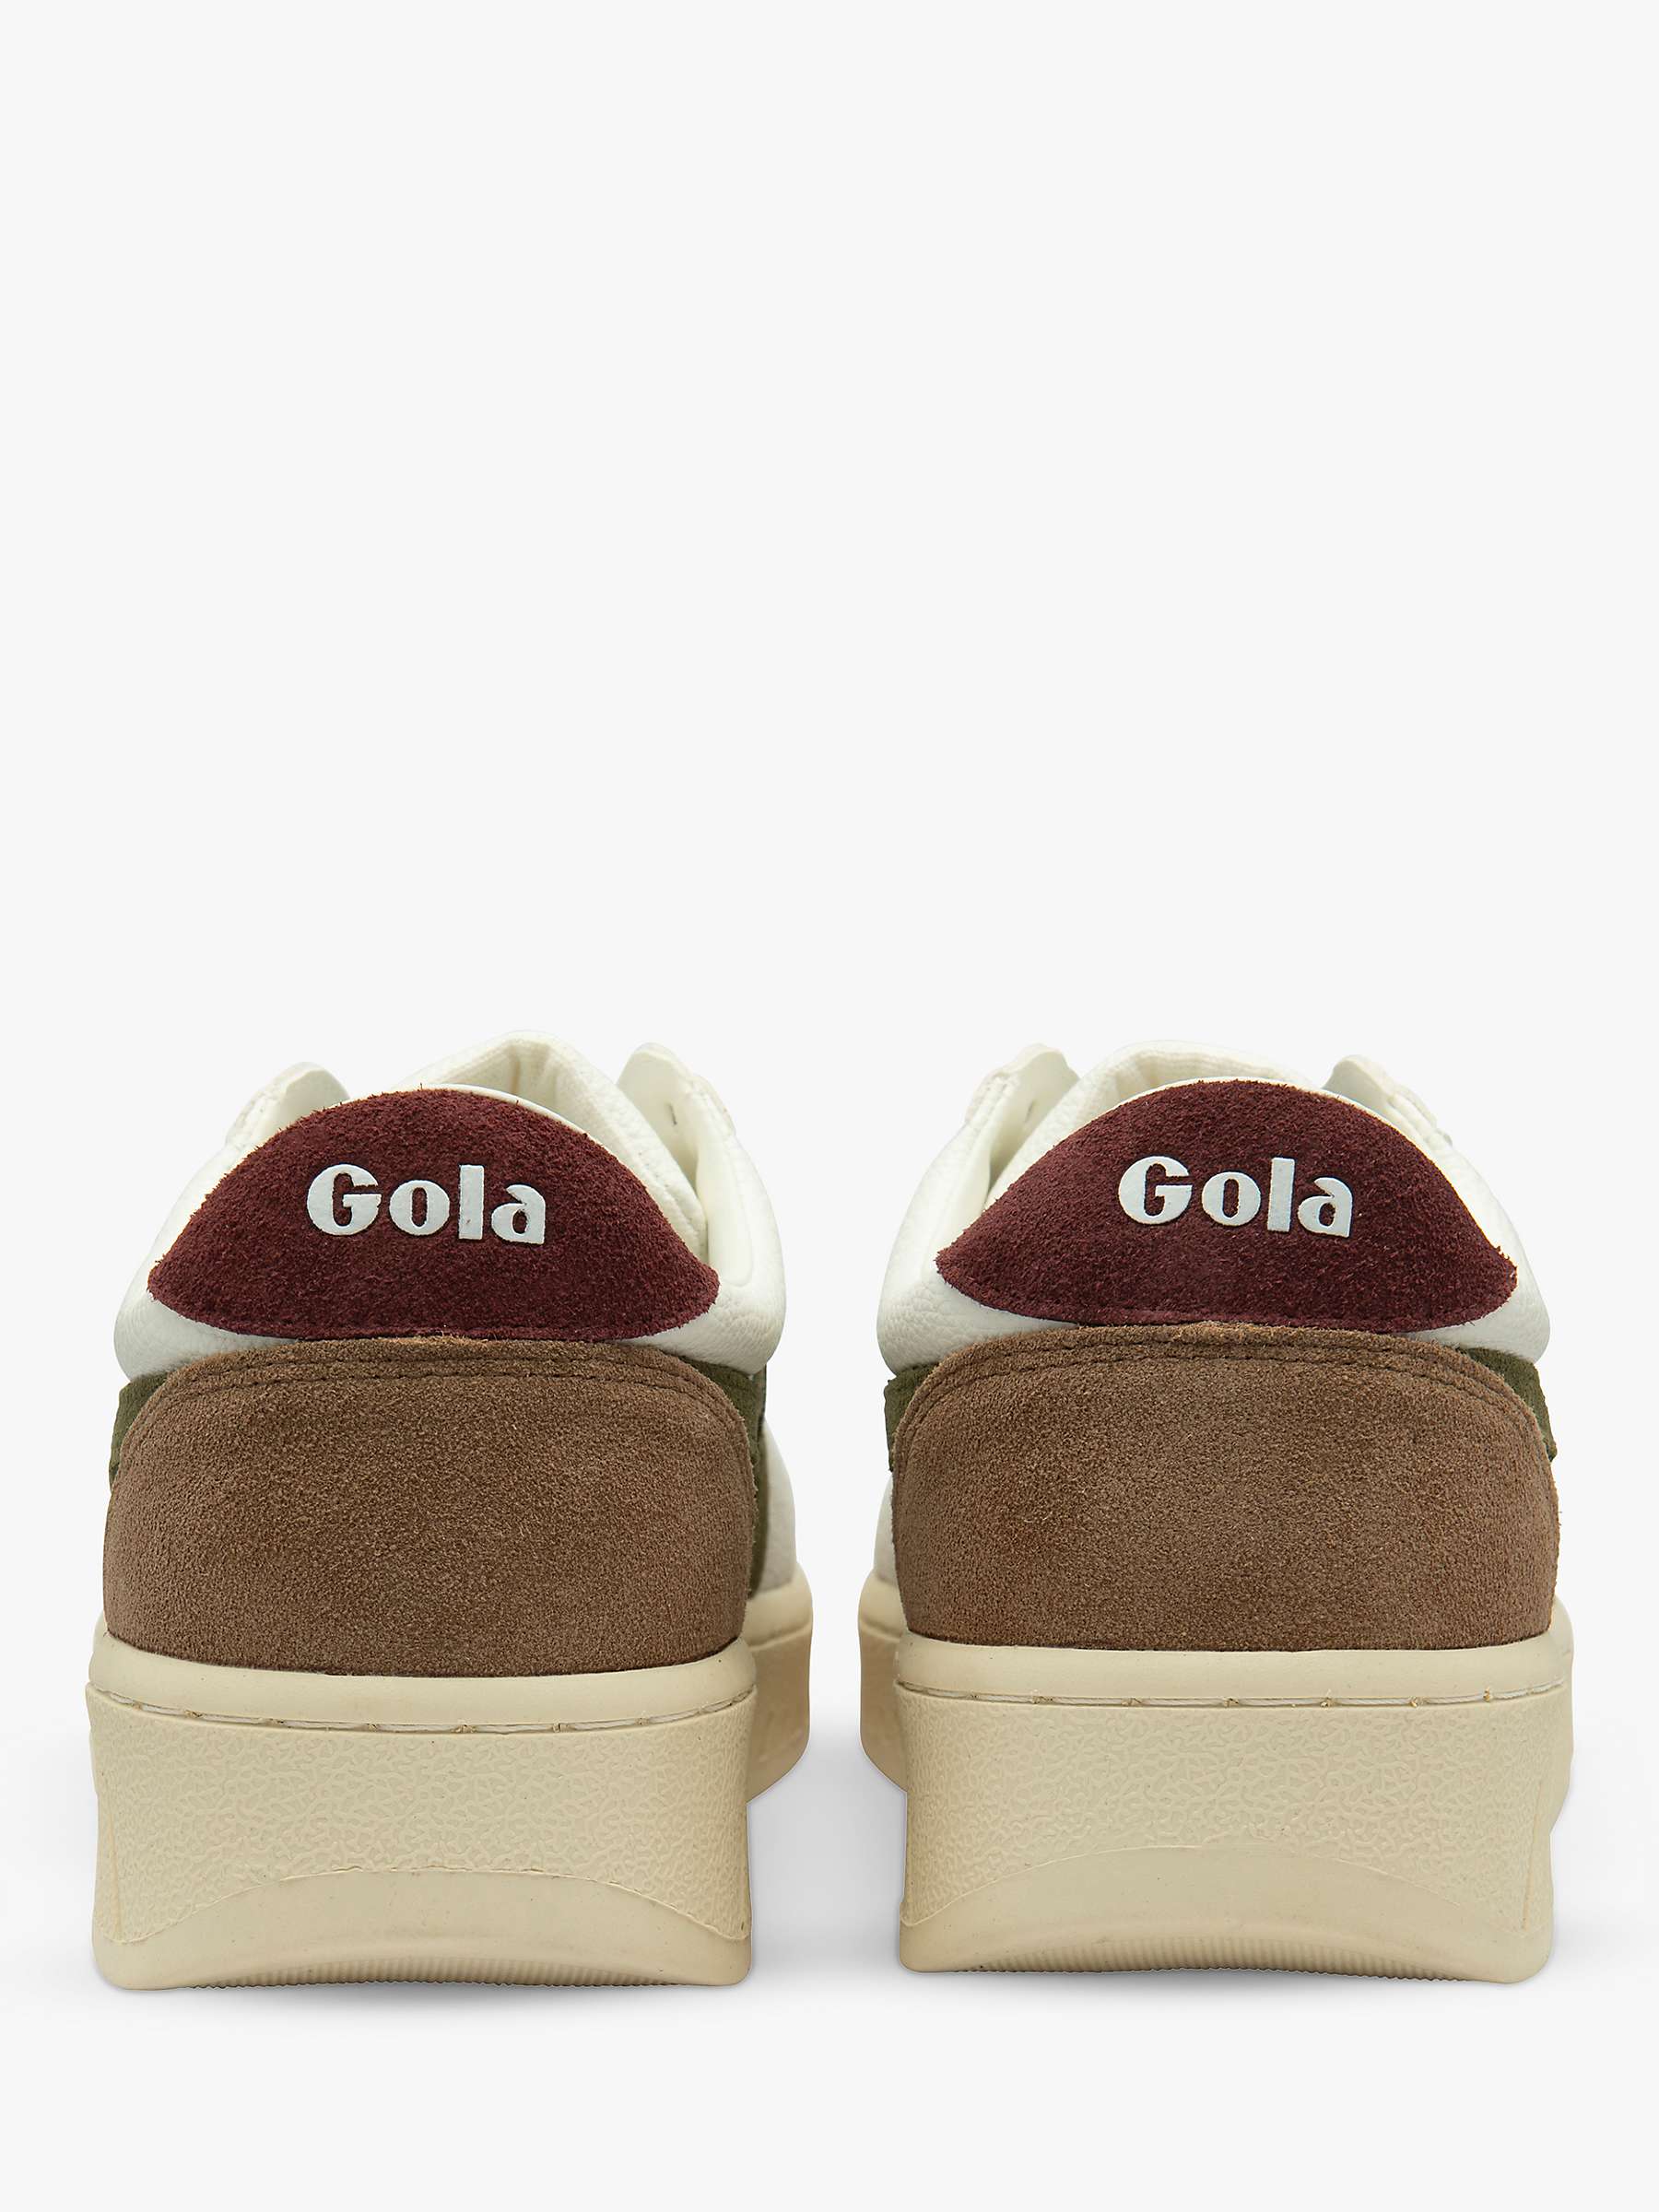 Buy Gola Grandslam Trident Lace Up Trainers Online at johnlewis.com